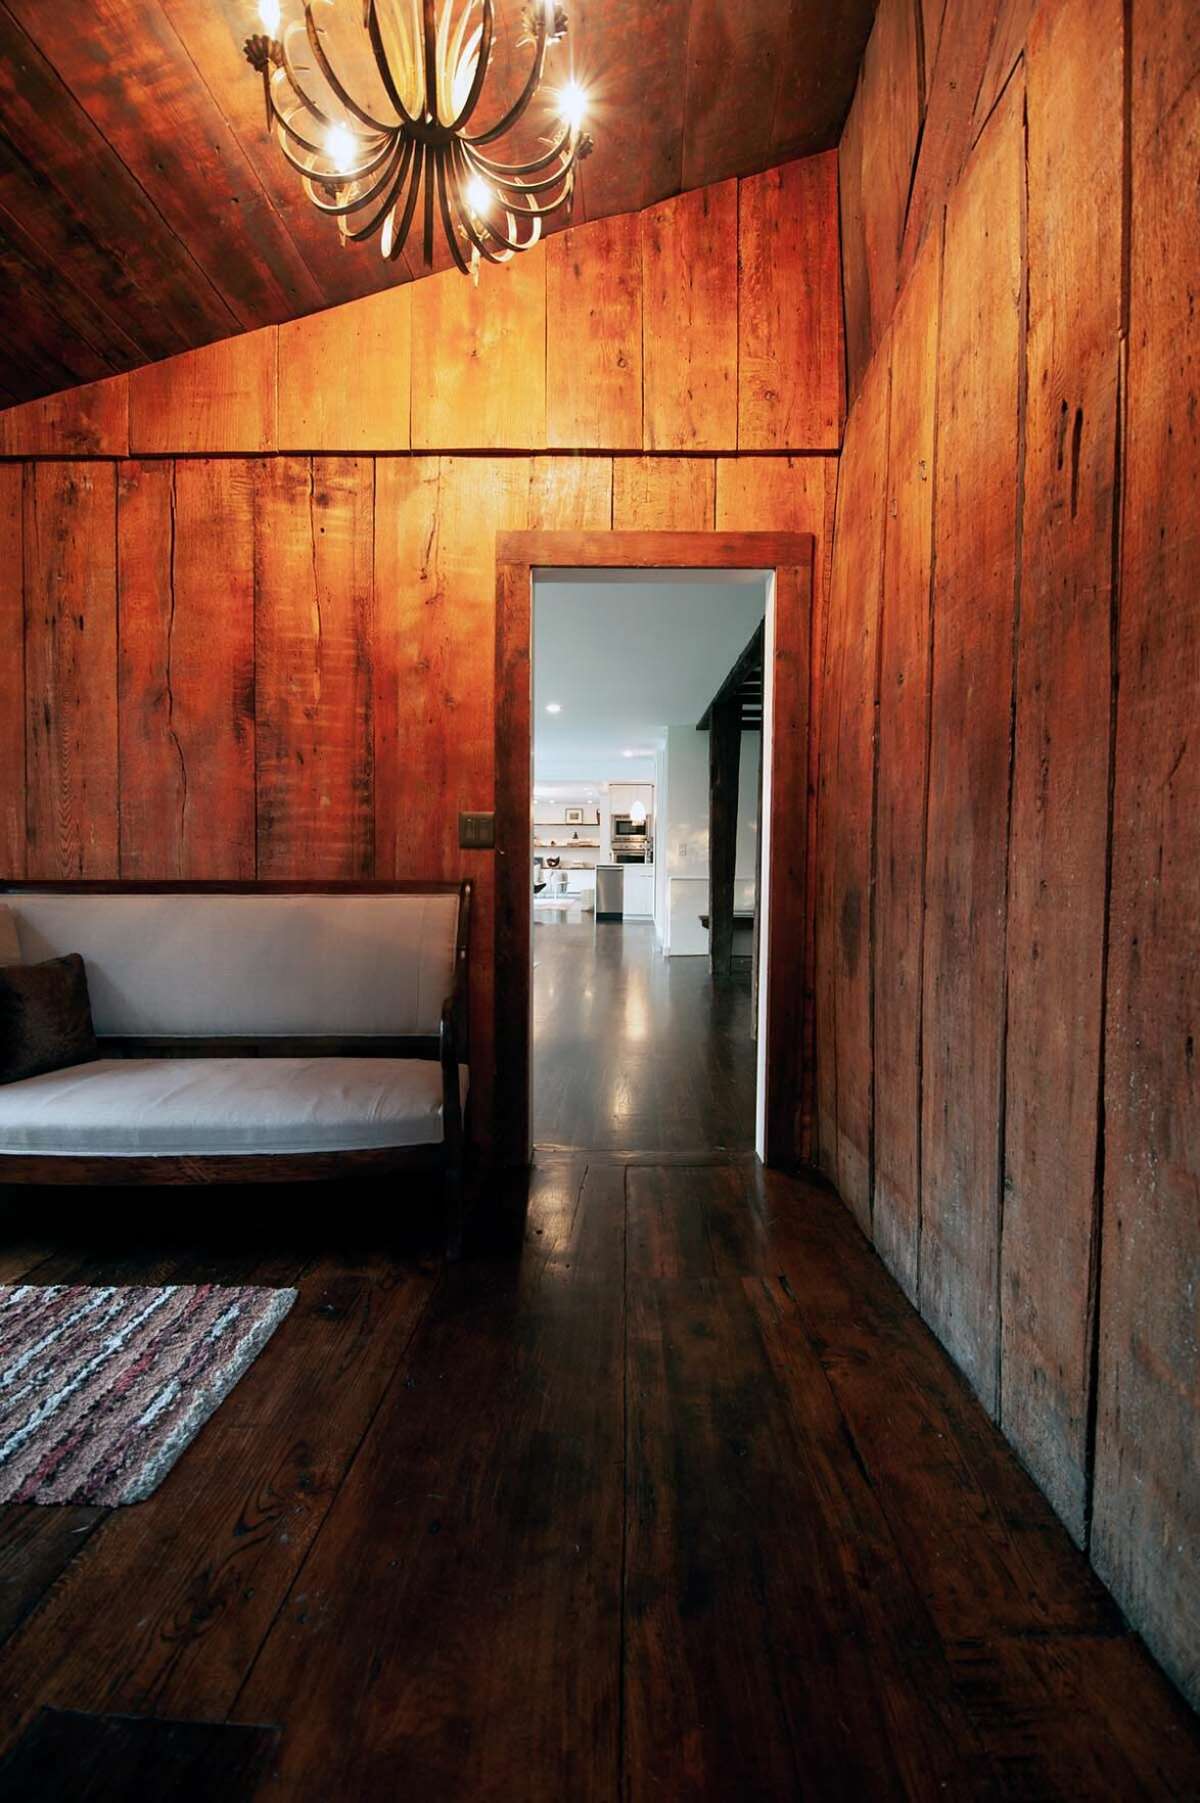 With signs of use and weathering, wide wood planks were preserved to show the farmhouse’s 18th-century character.